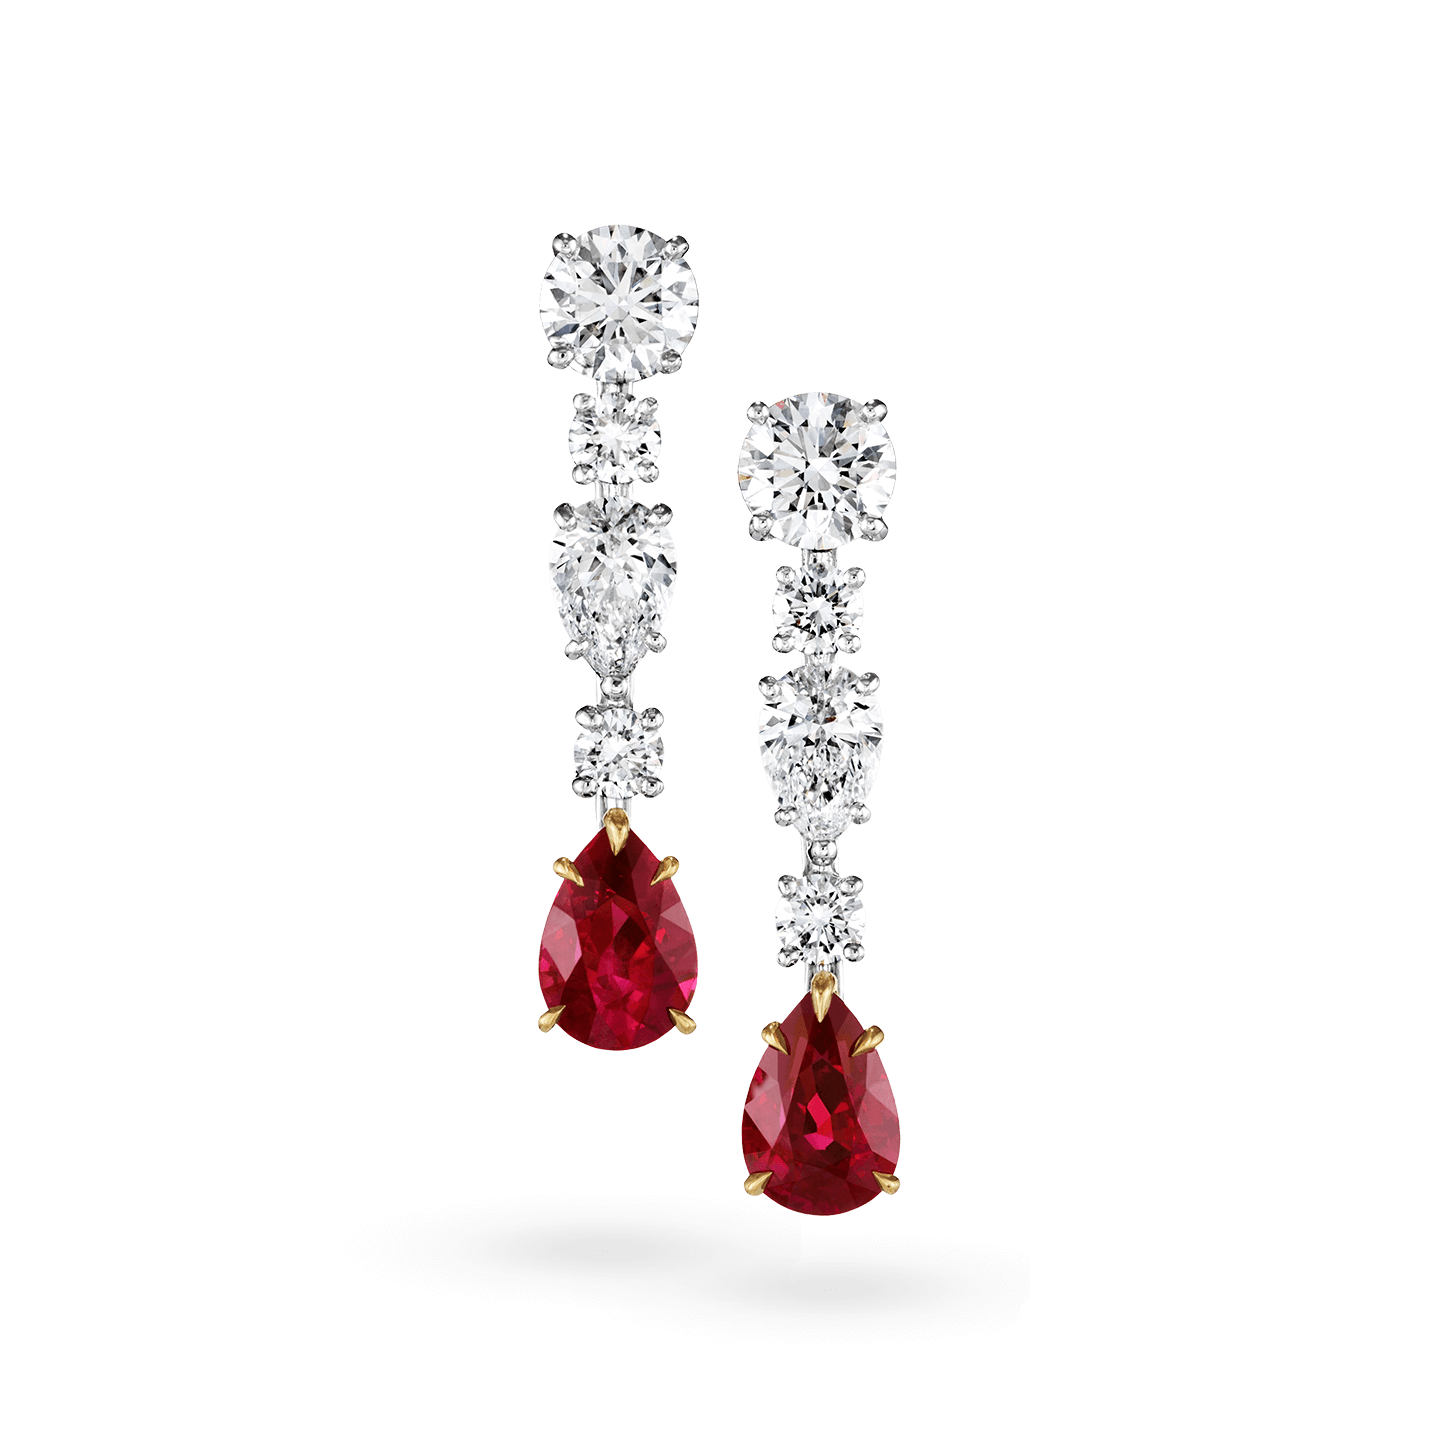 Diamond and Ruby Drop Earrings, Product Image 1